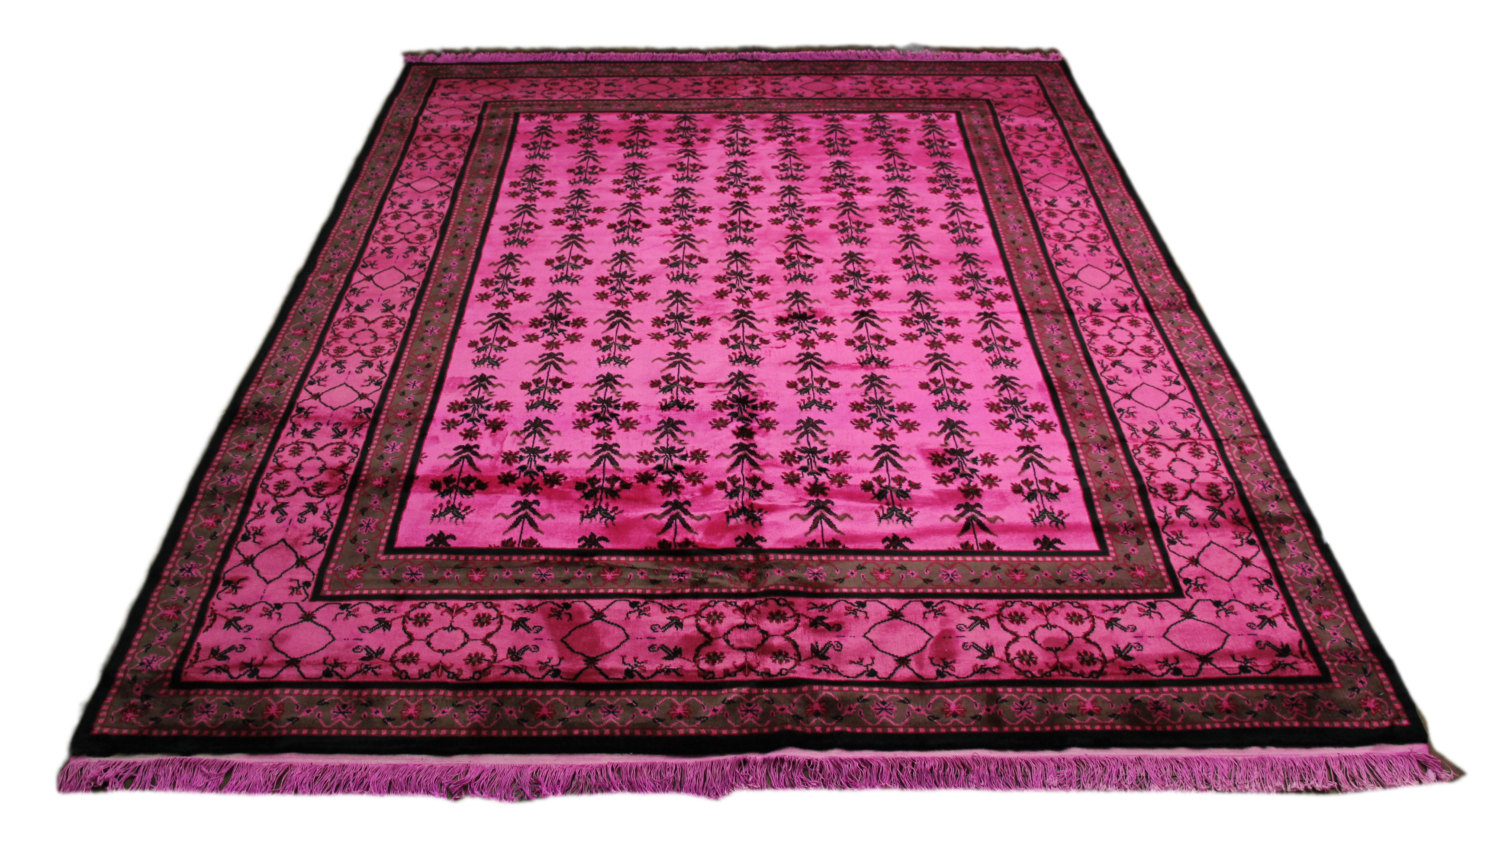 Hot Pink 8x10 Overdyed Art Deco Floral Wool Rug 2772